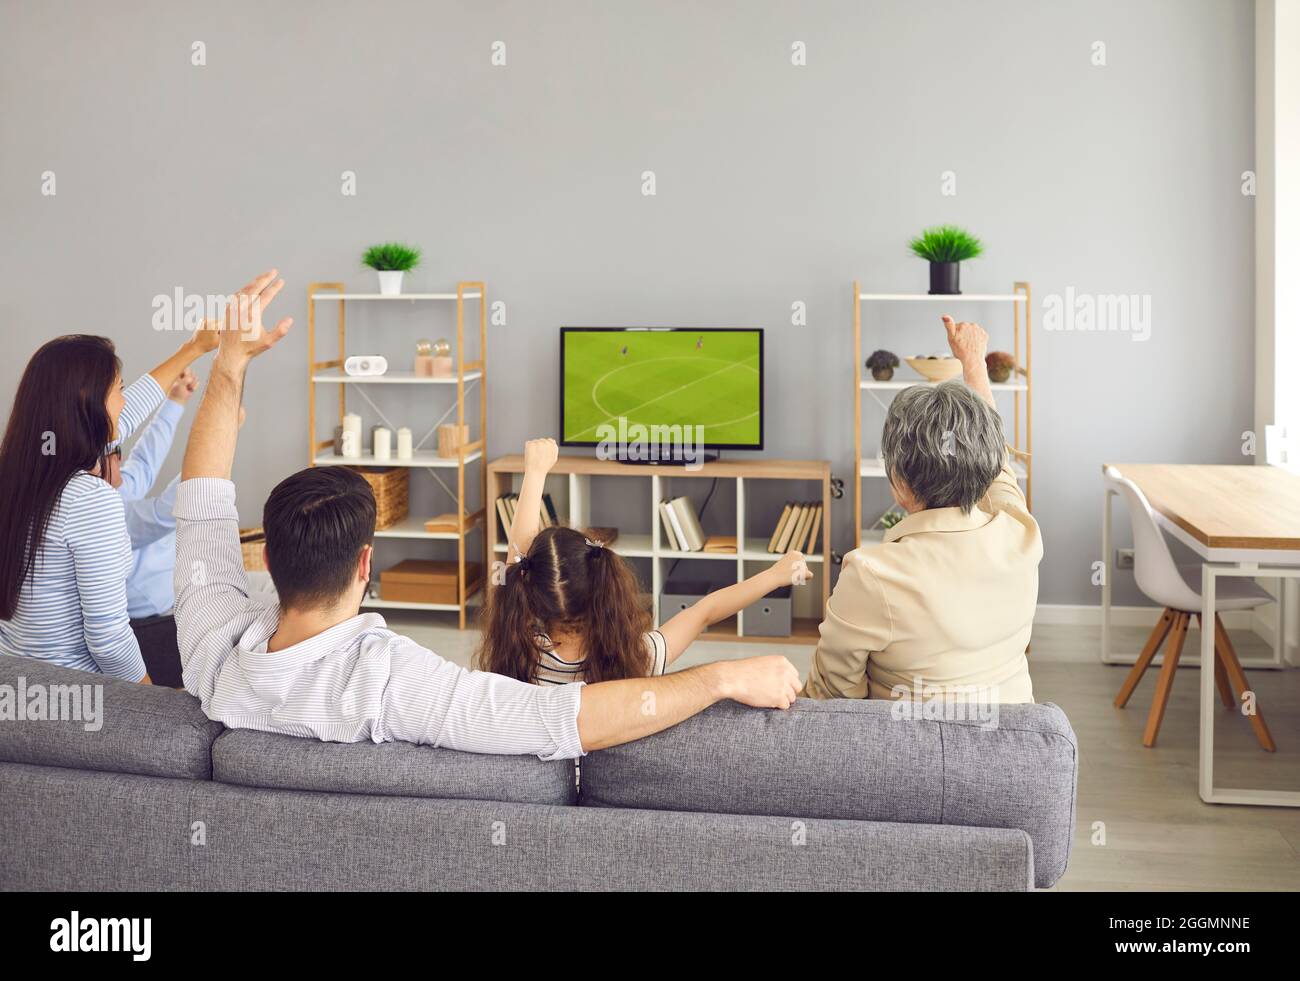 Super excited and happy big family team watch football match together on the couch at home. Stock Photo